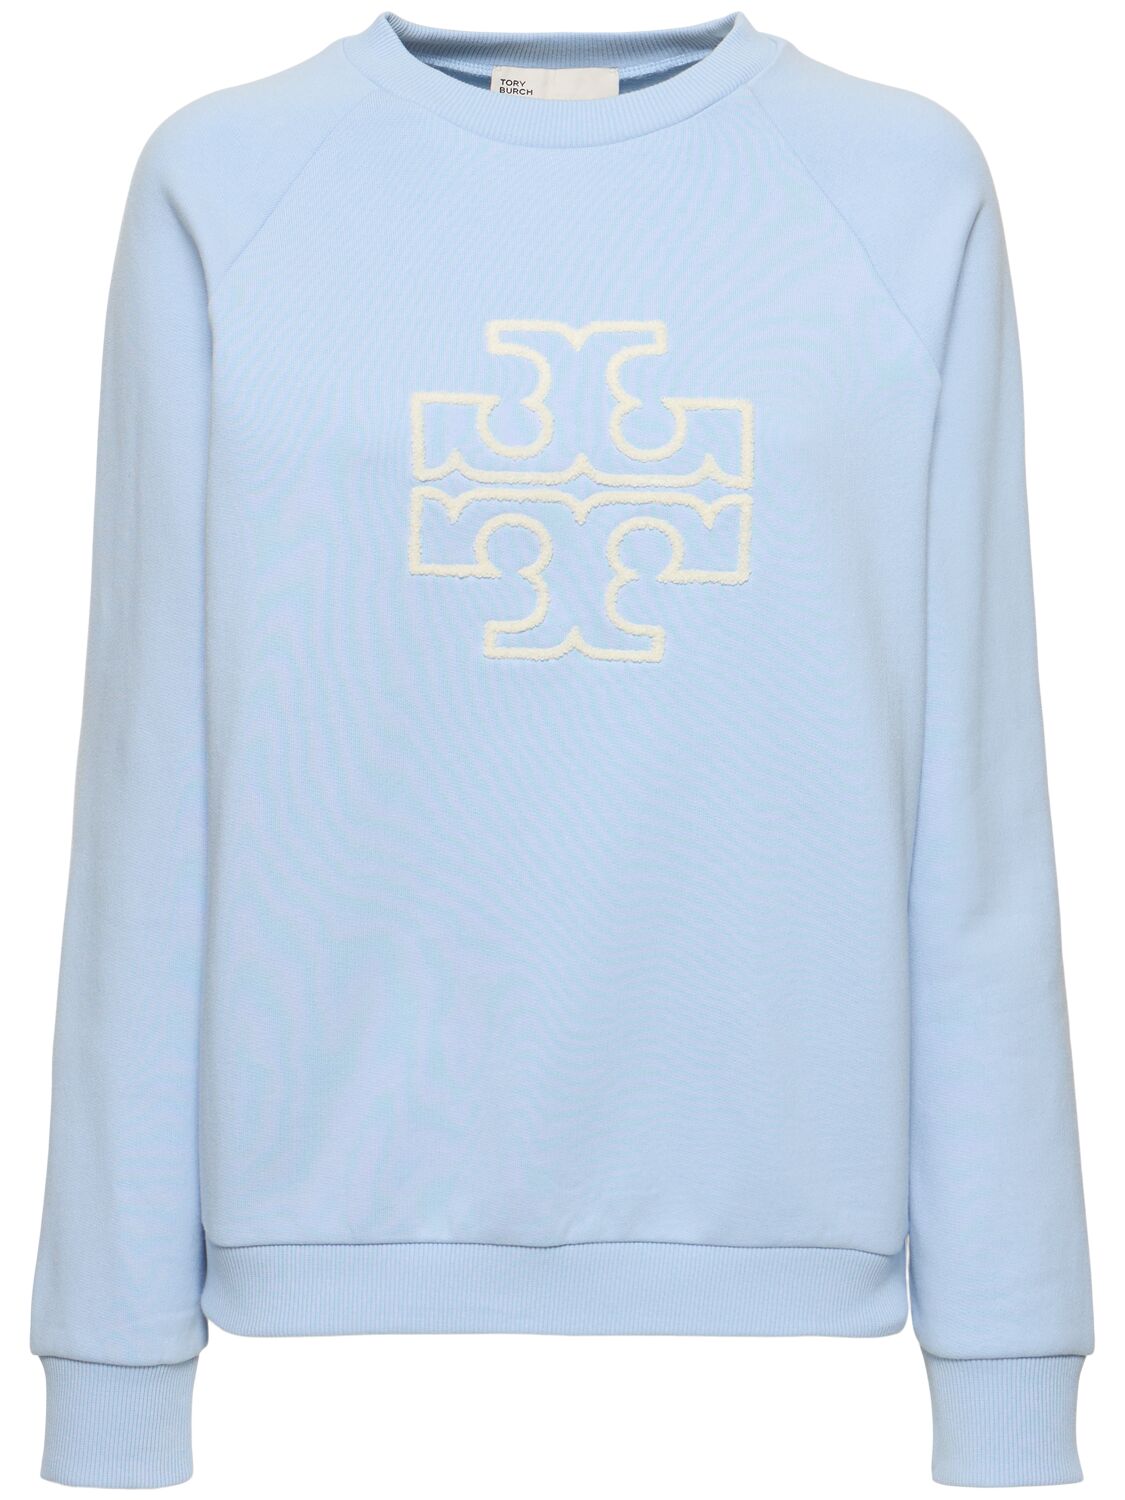 Tory Sport French Terry Crewneck Sweatshirt In Blue